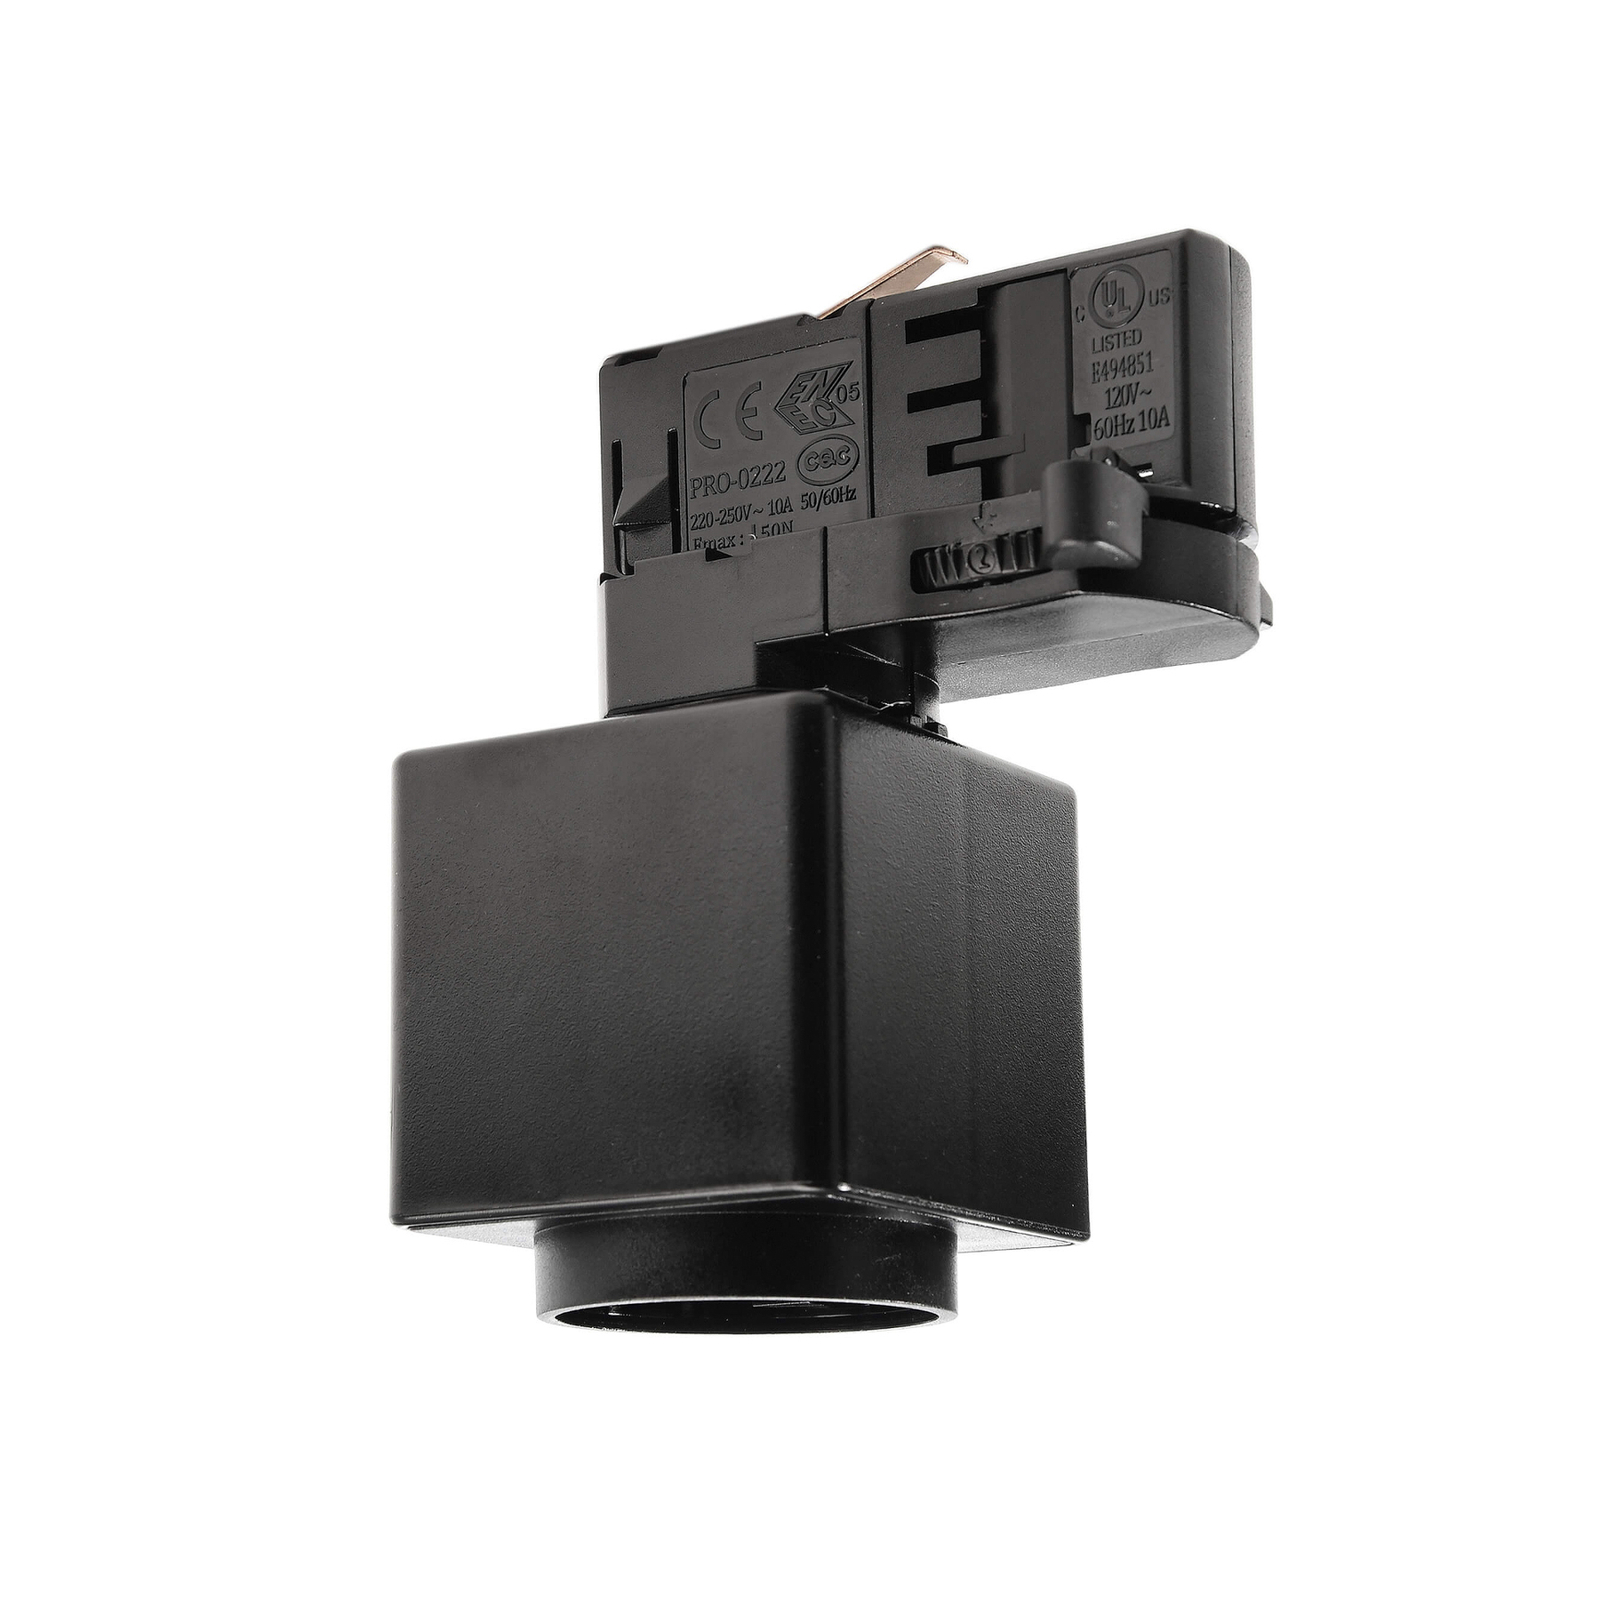 D Line power point adapter 3-circuit track black